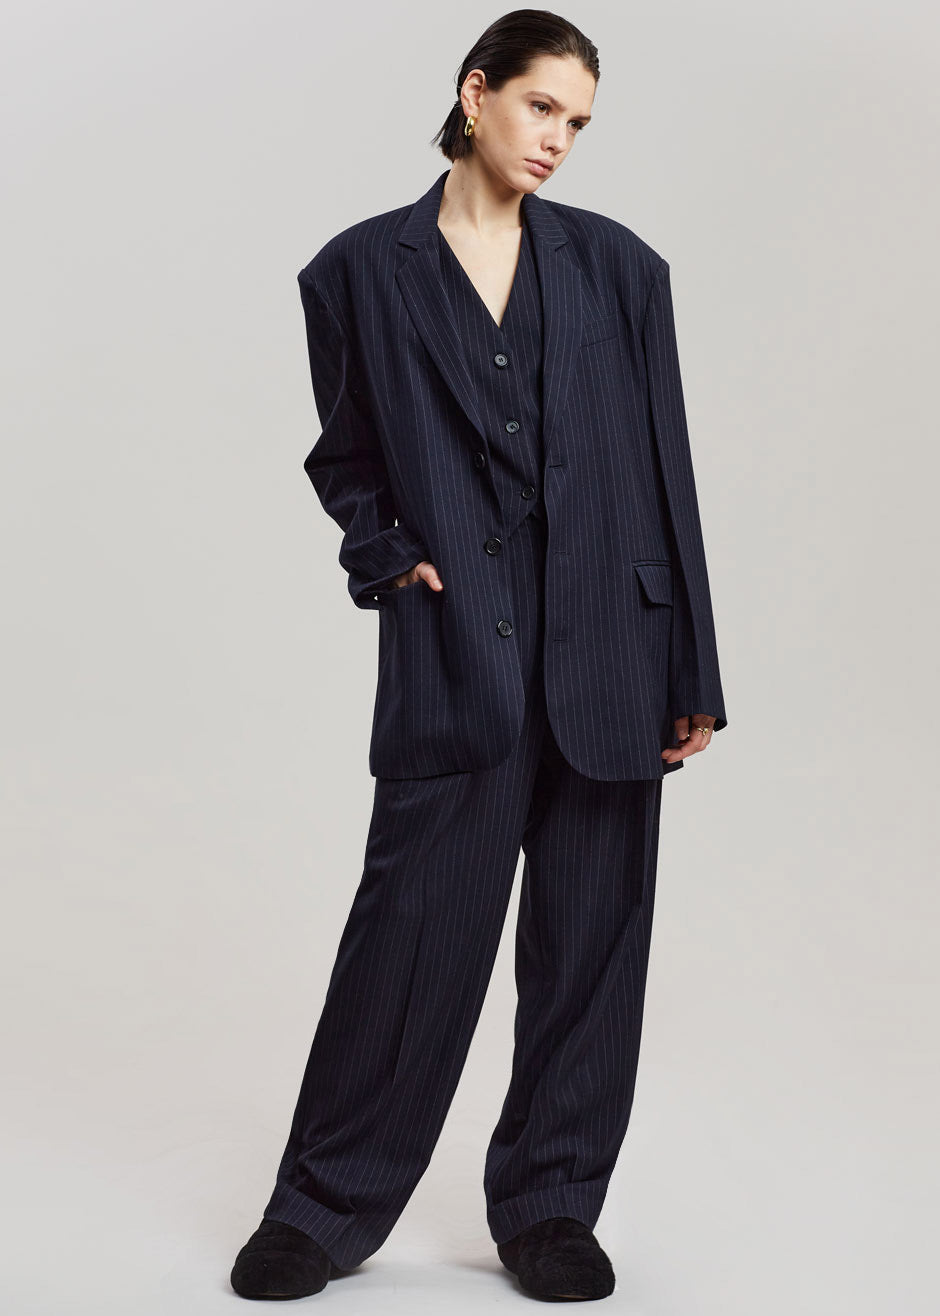 Tansy Tailored Vest - Navy Pinstripe – The Frankie Shop